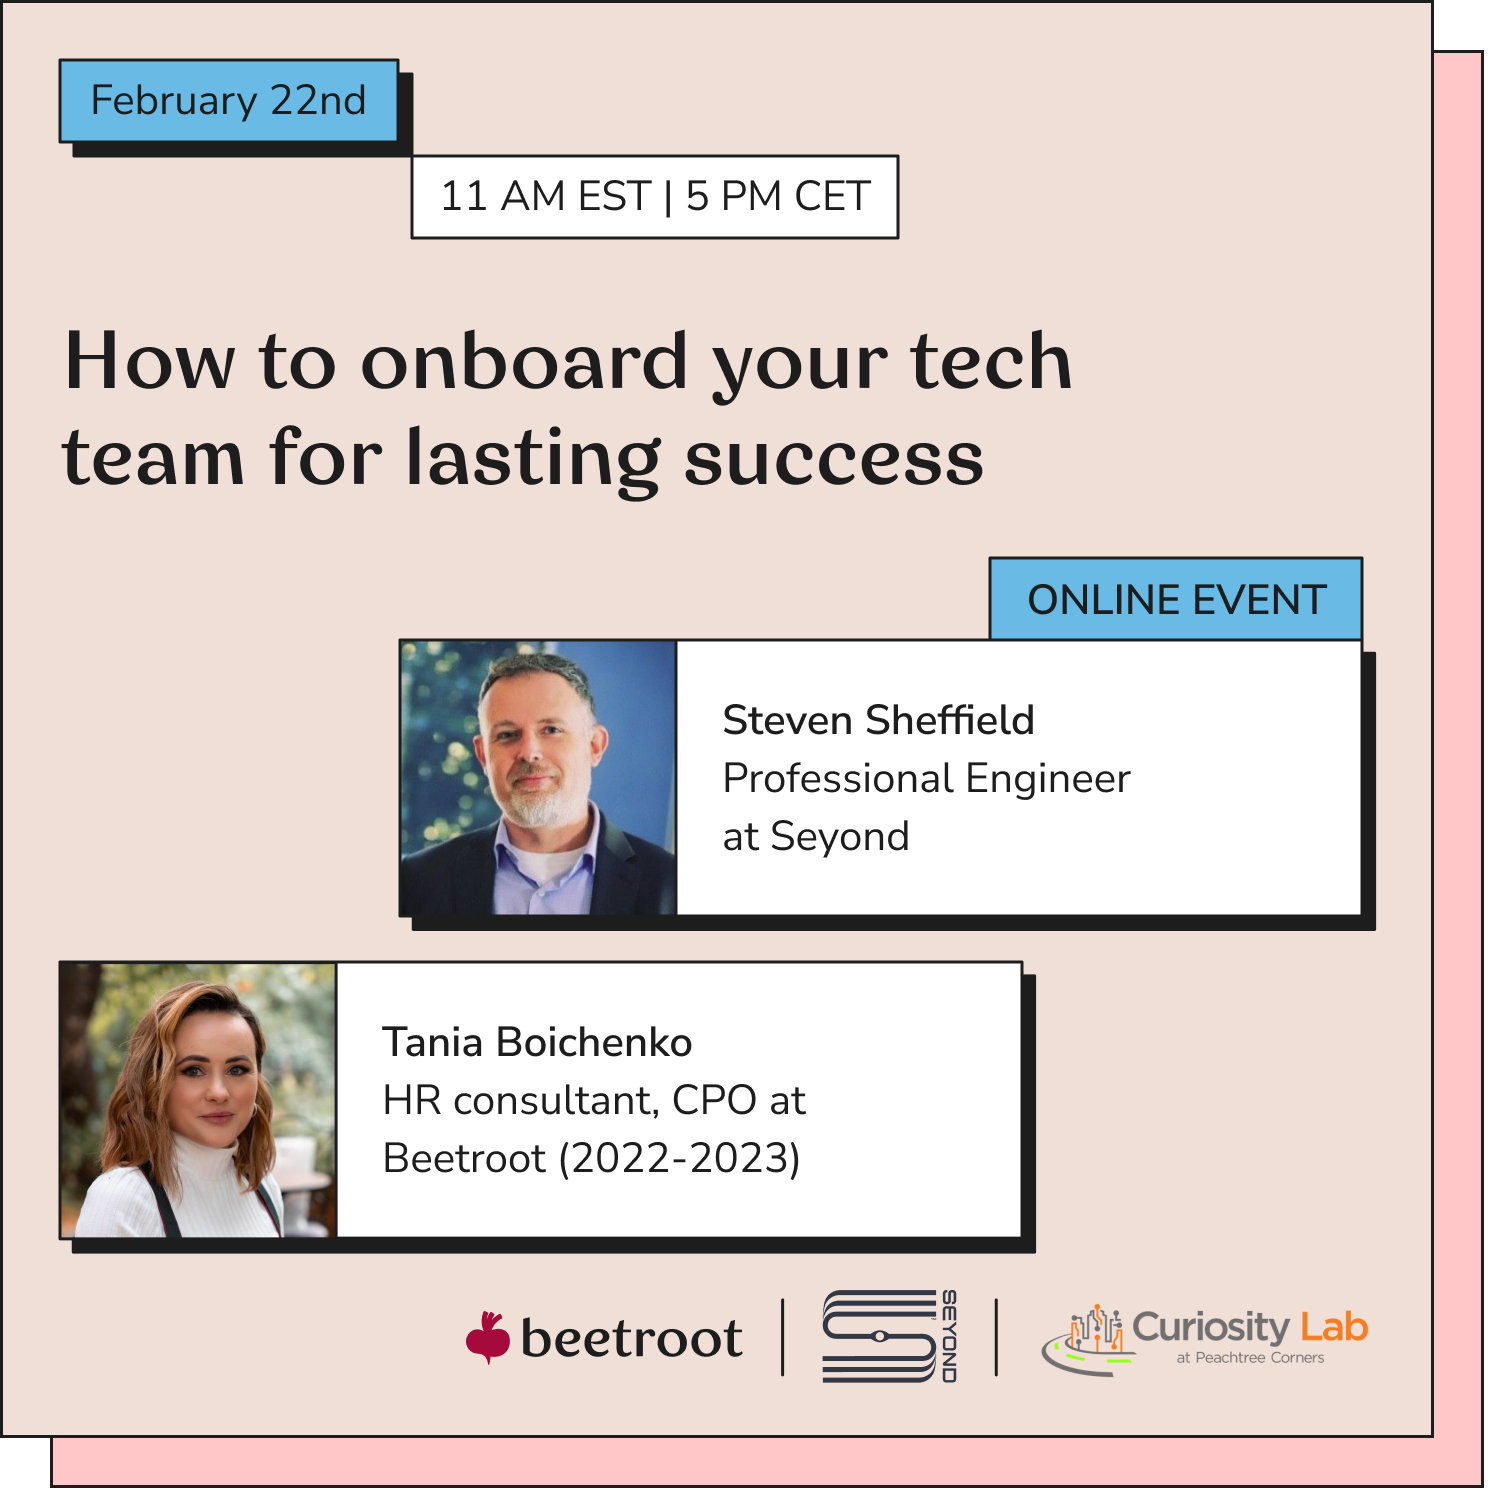 Tech team onboarding for lasting success - Beetroot event